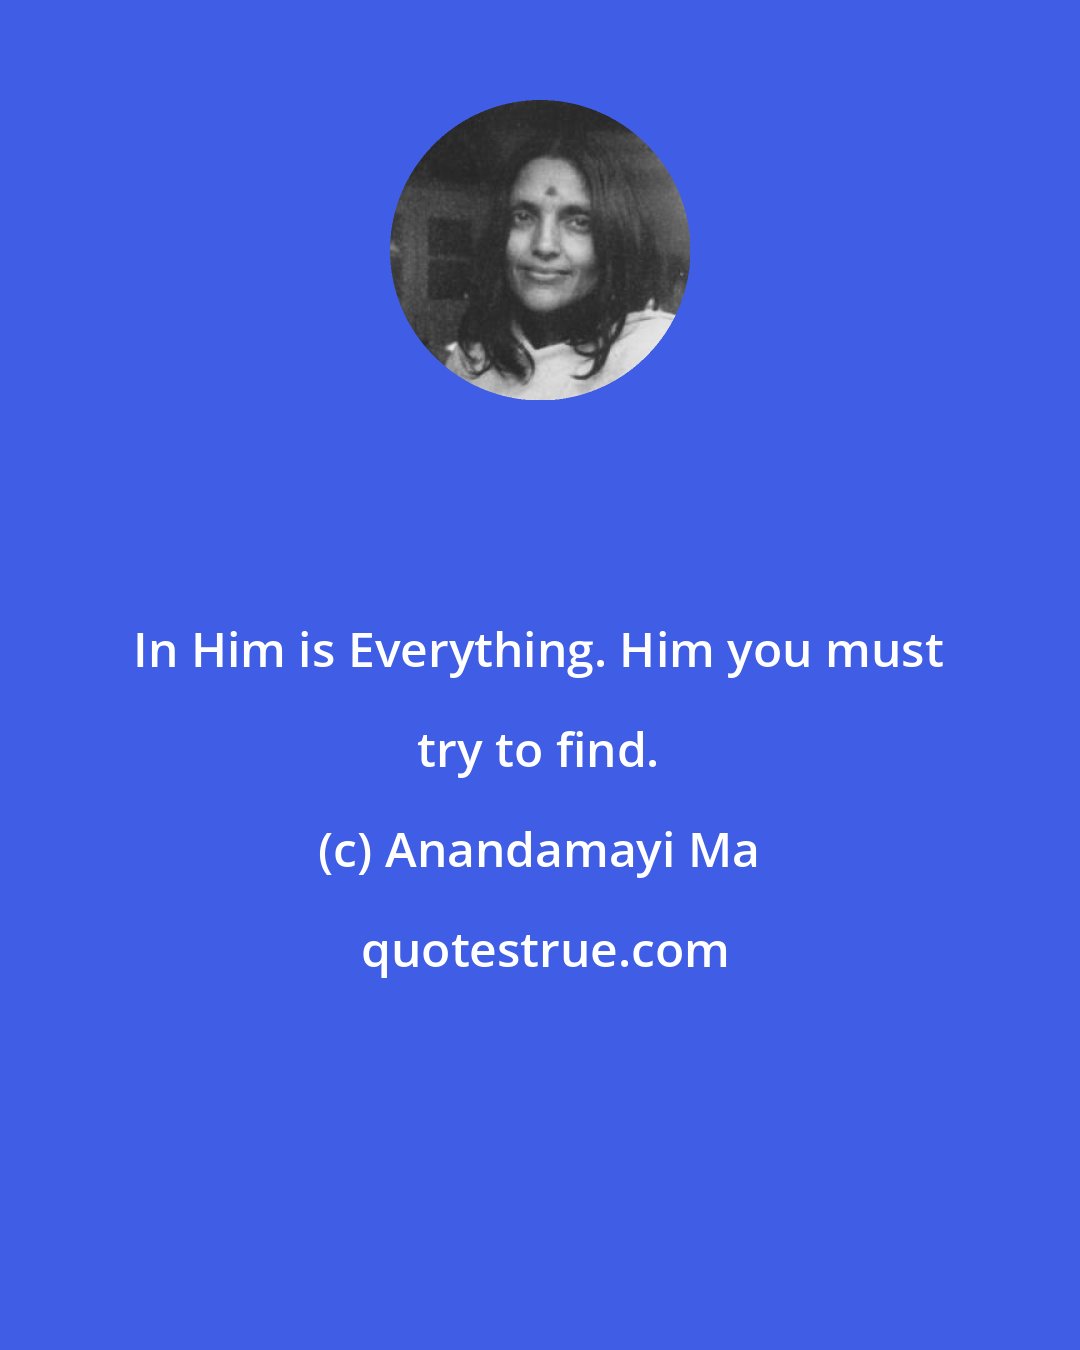 Anandamayi Ma: In Him is Everything. Him you must try to find.